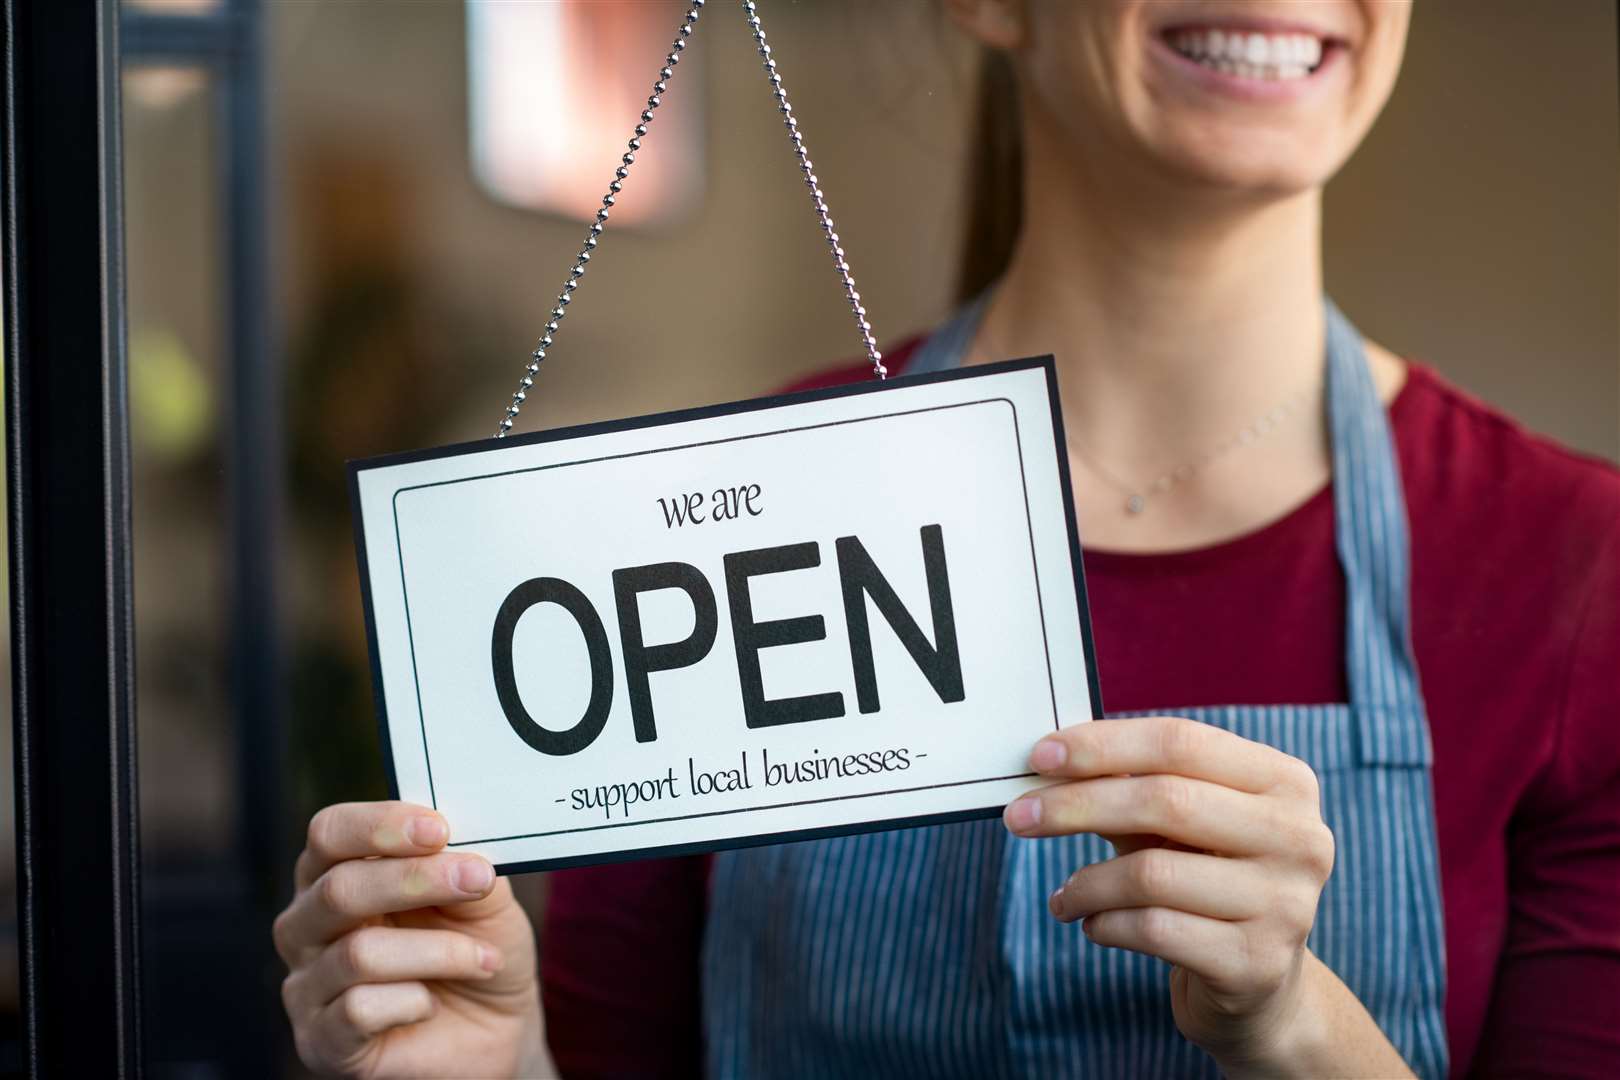 Sunday trading laws mean larger shops can open for six hours. Image: iStock.